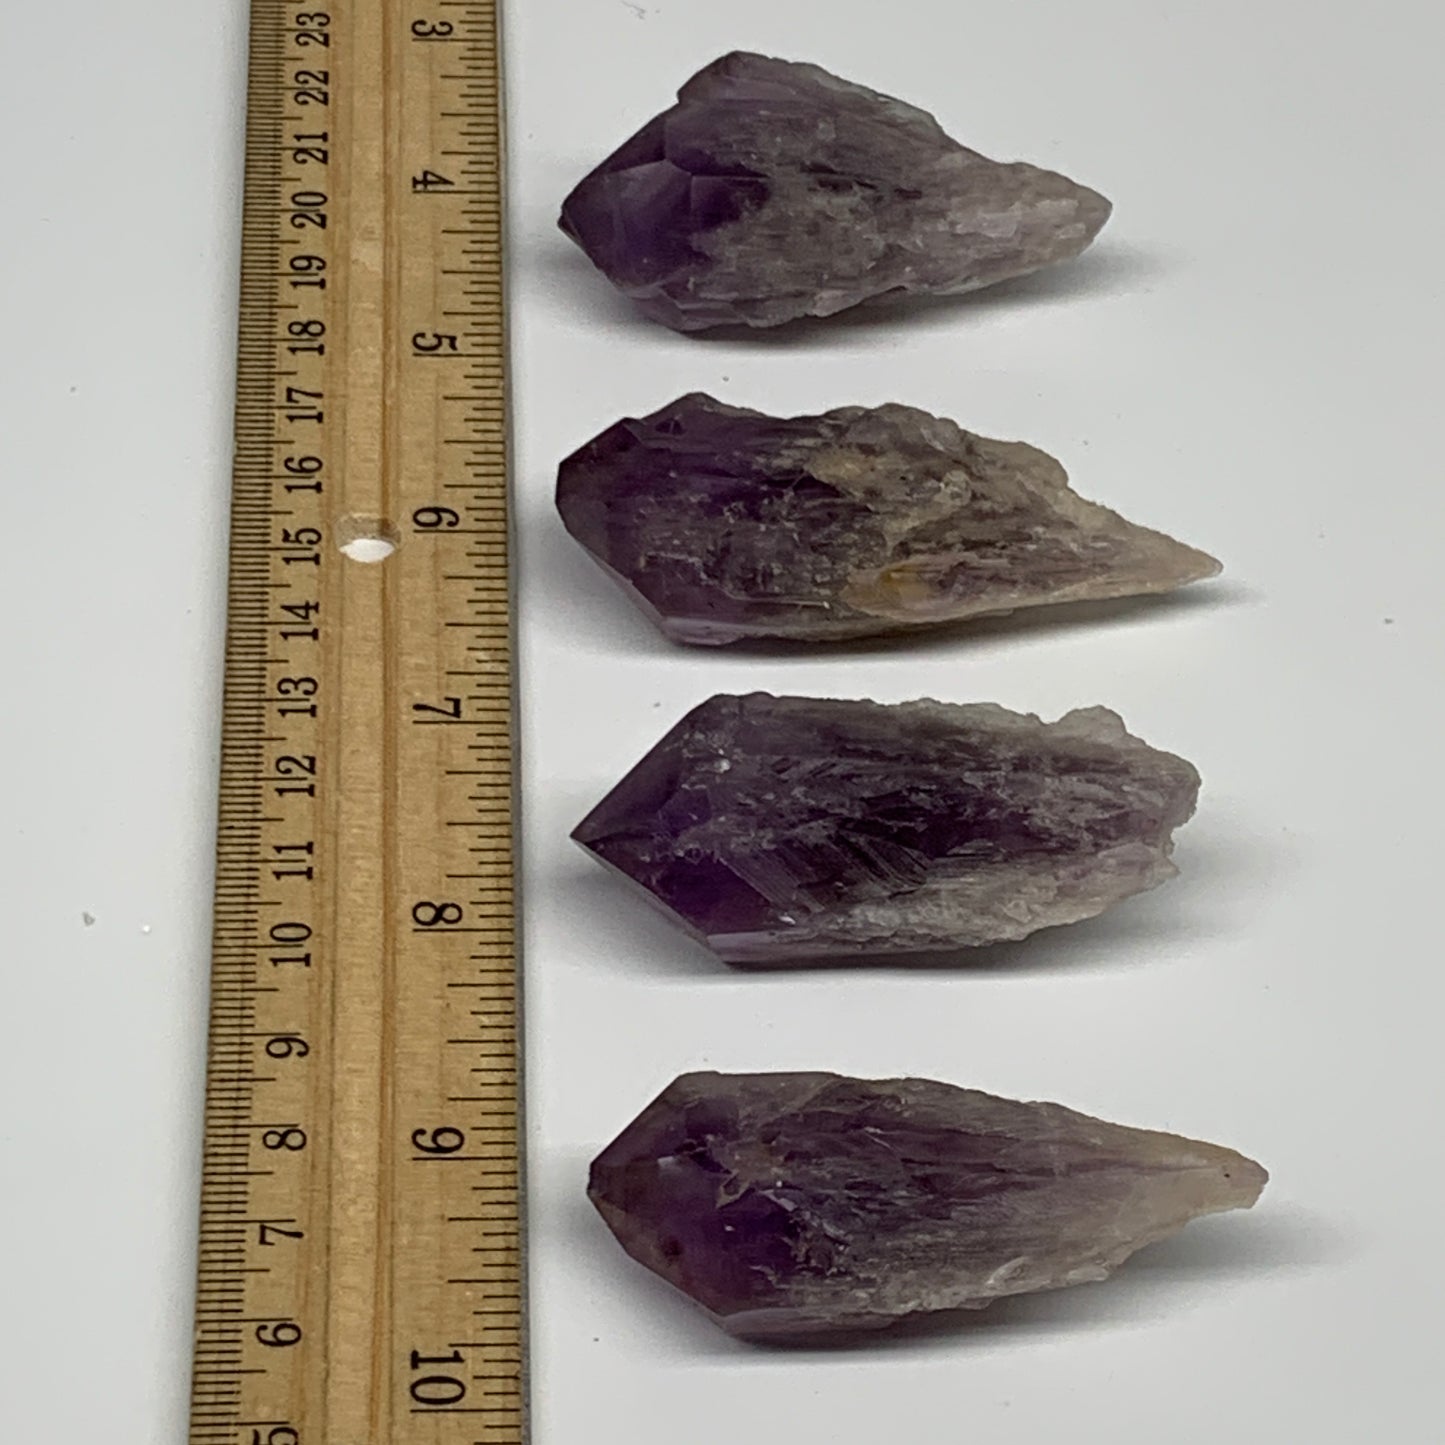 118g, 2.1" - 2.5", 4pcs, Amethyst Point Polished Rough lower part, B32385